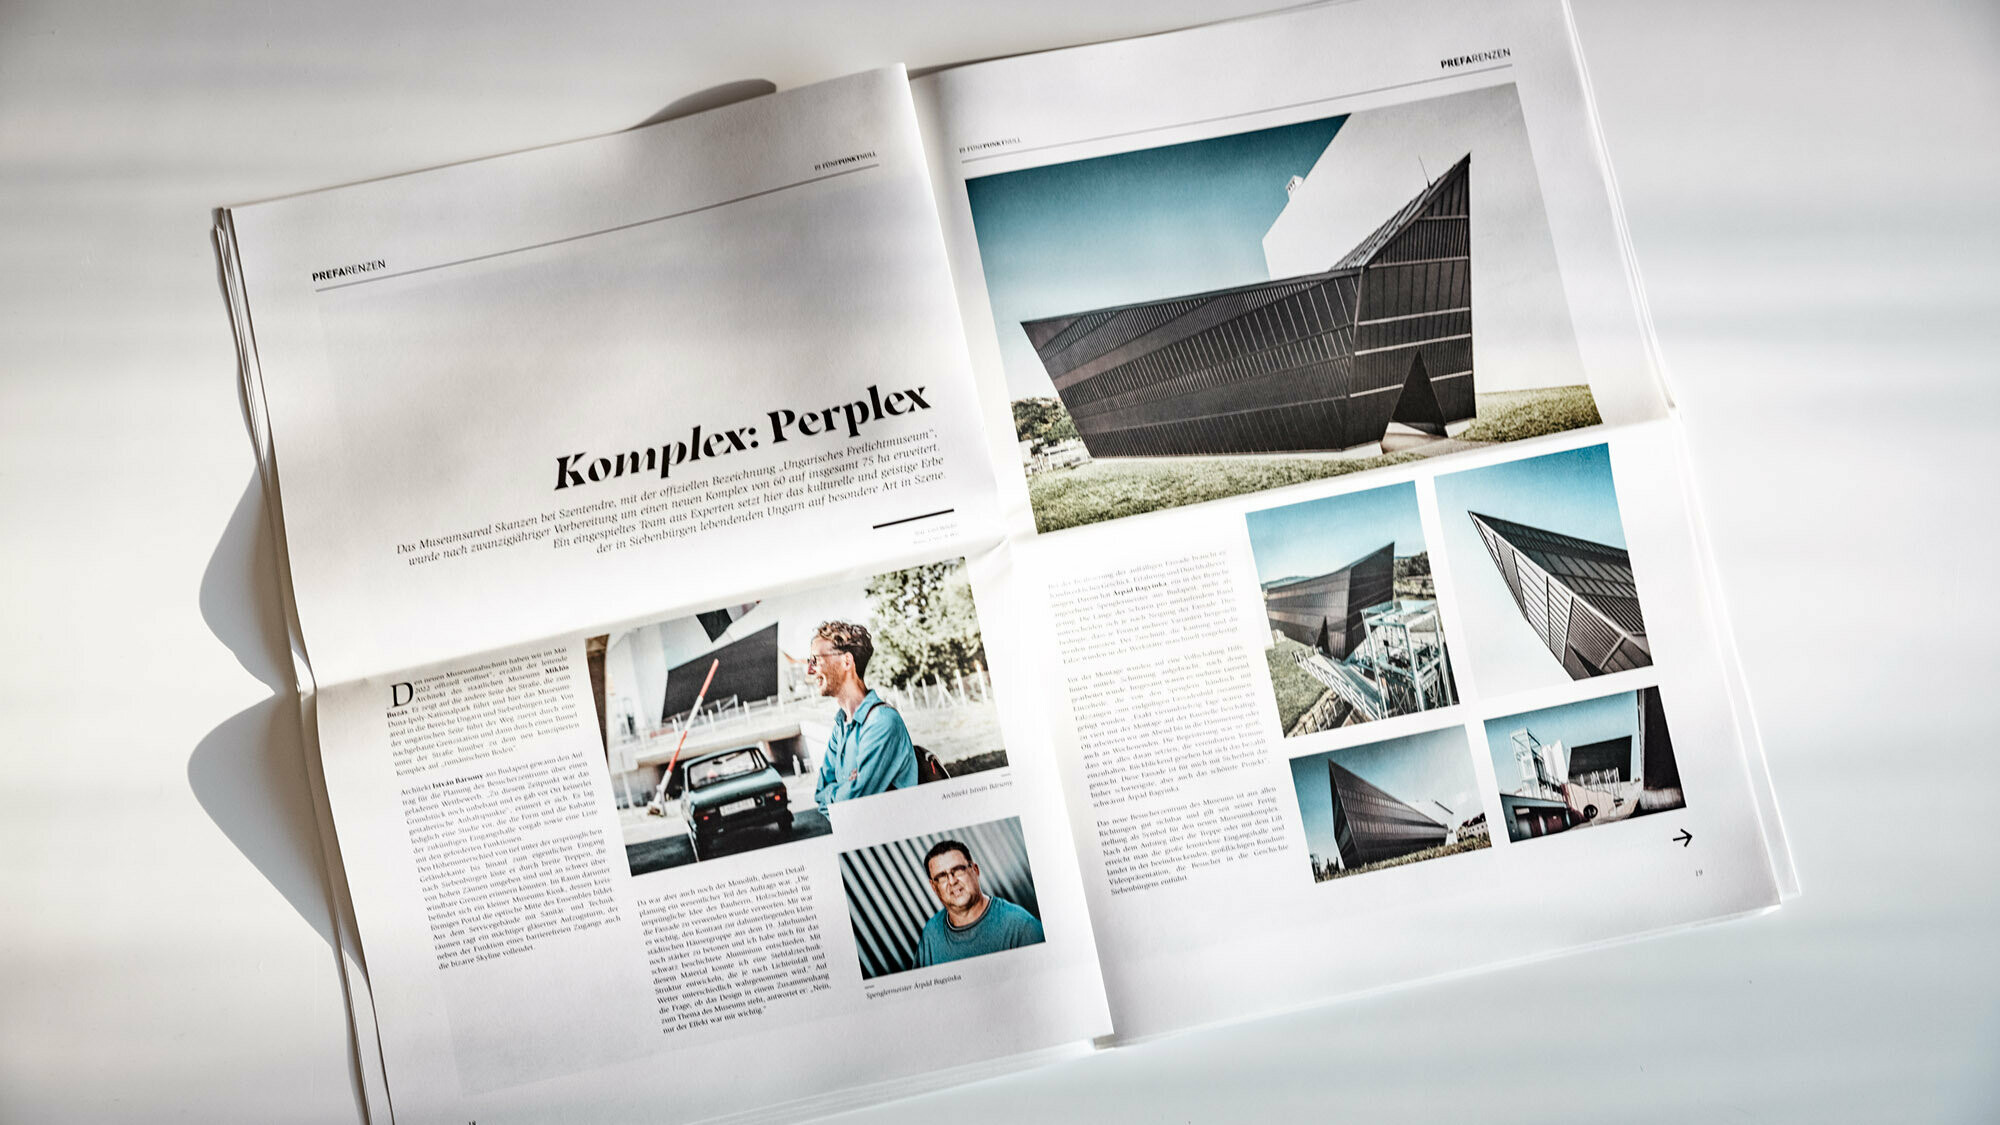 Frontal view of a tilted double page showing text as well as architecture photos and portraits of architects.